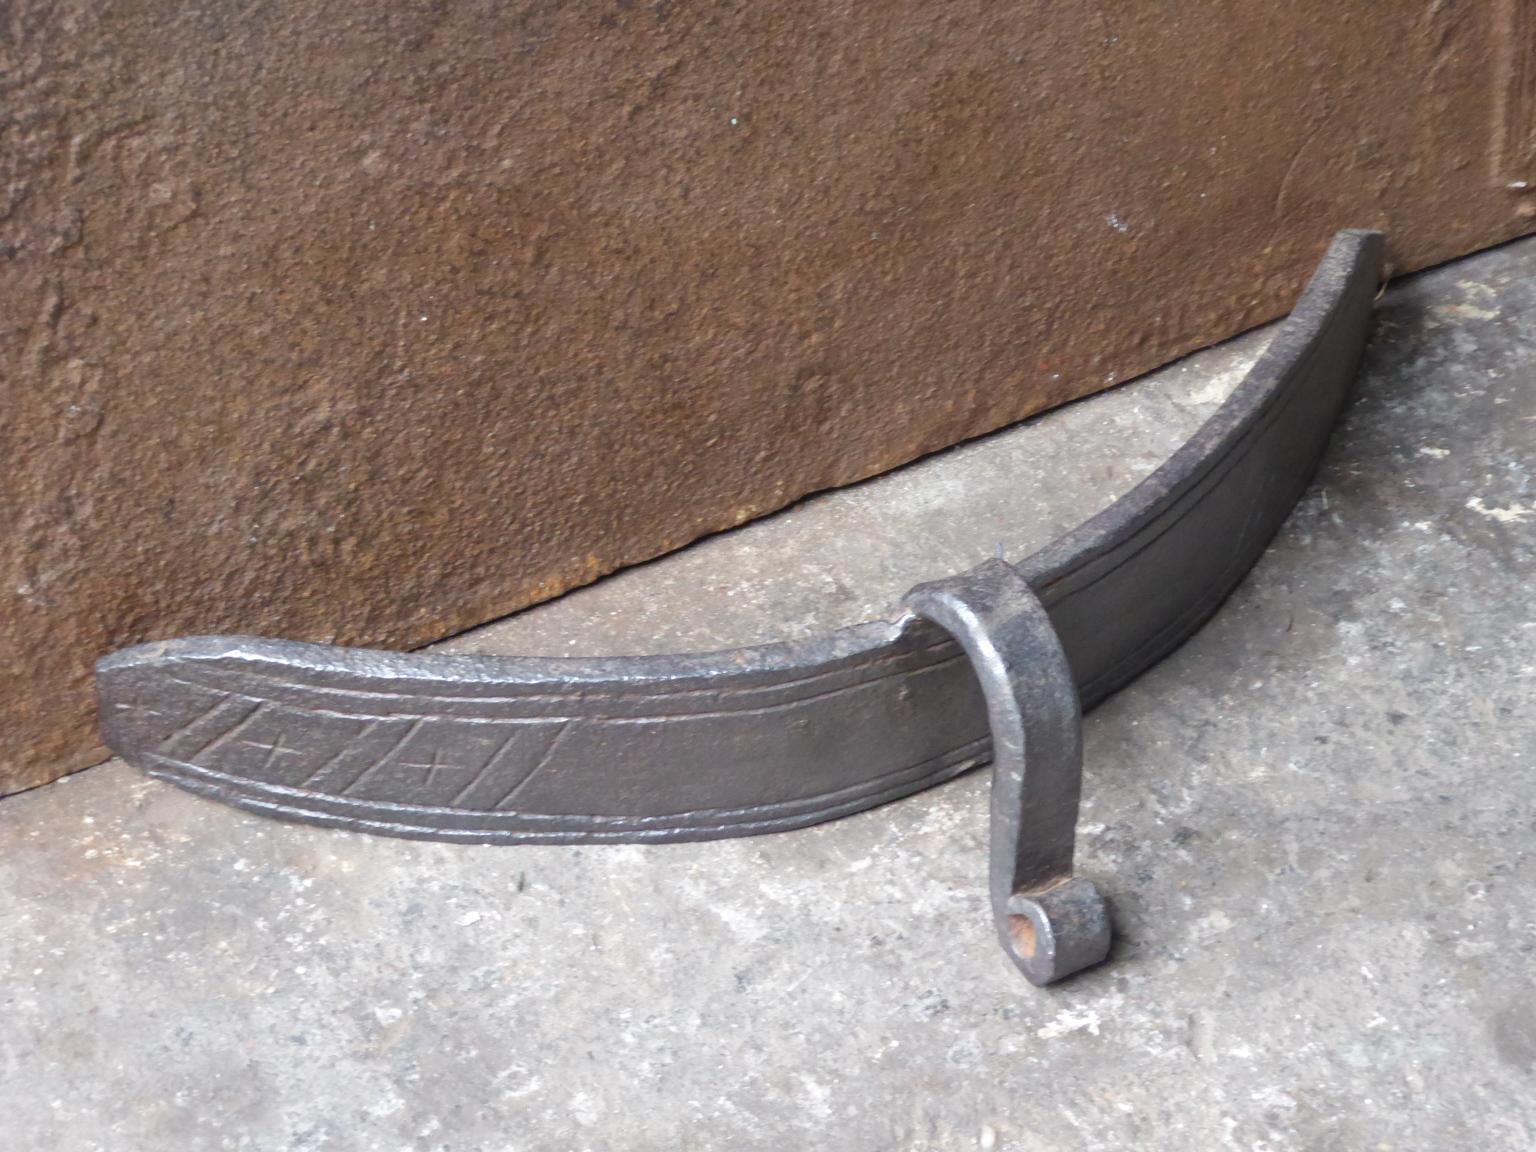 18th century French Louis XV period fire fender. The fender is made of wrought iron. The condition is good.







